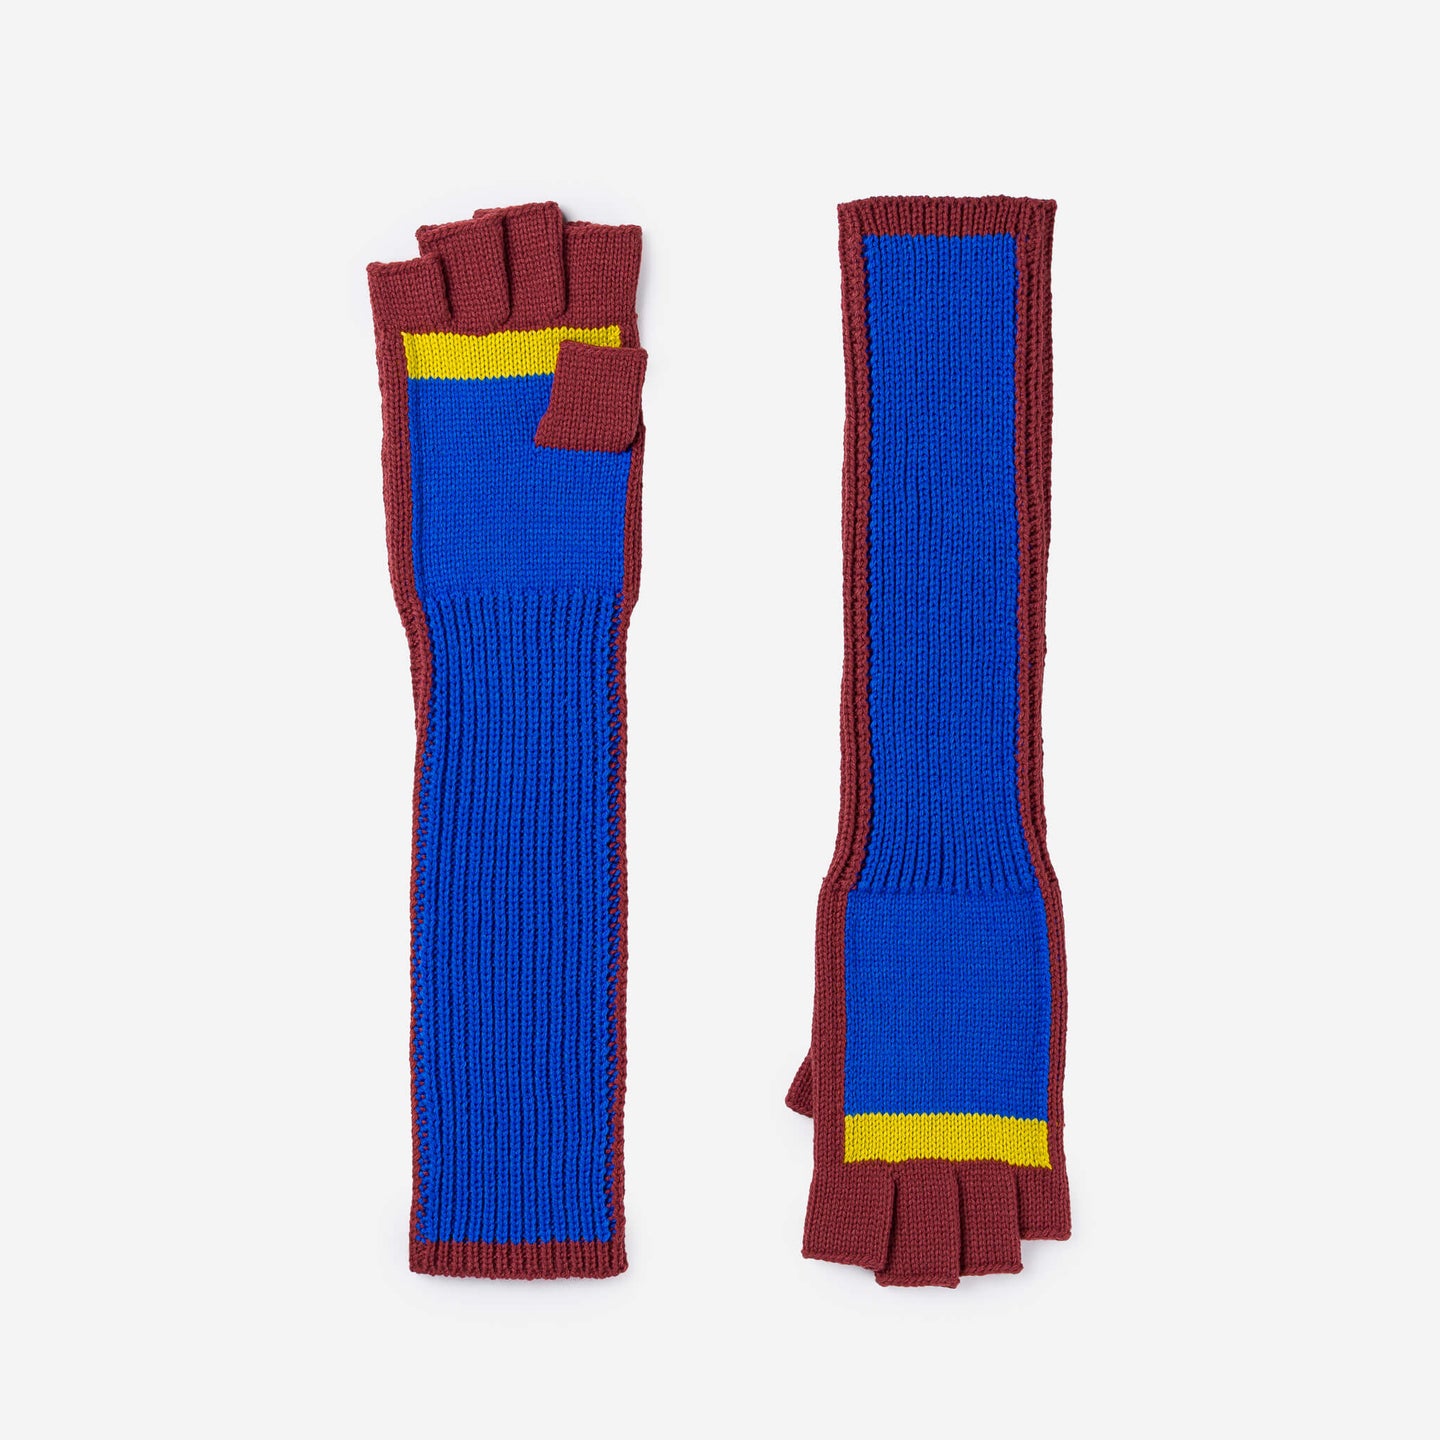 Outline Knit Fingerless Gloves Sporty Colorful Unique